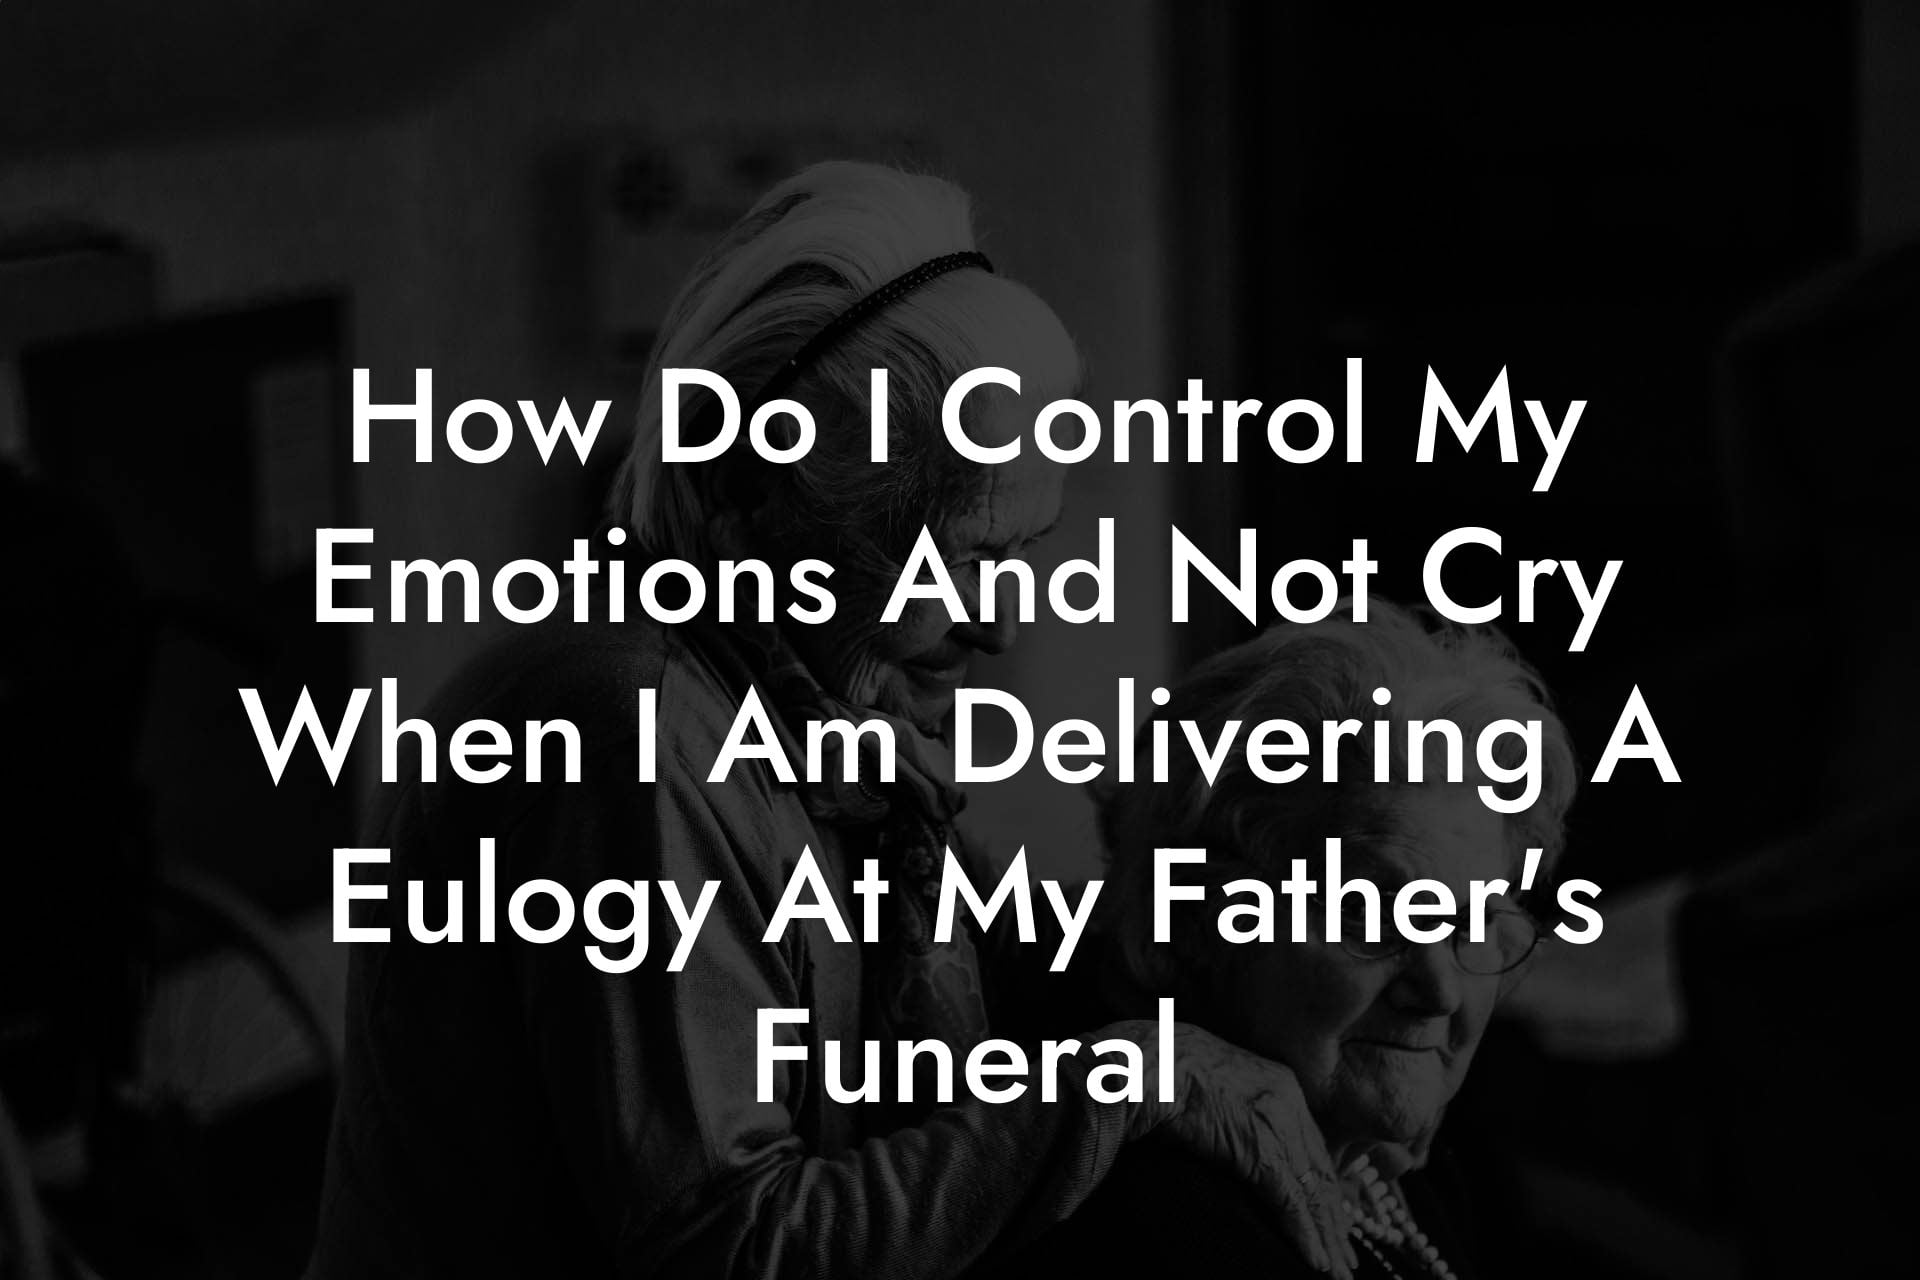 How Do I Control My Emotions And Not Cry When I Am Delivering A Eulogy At My Father's Funeral